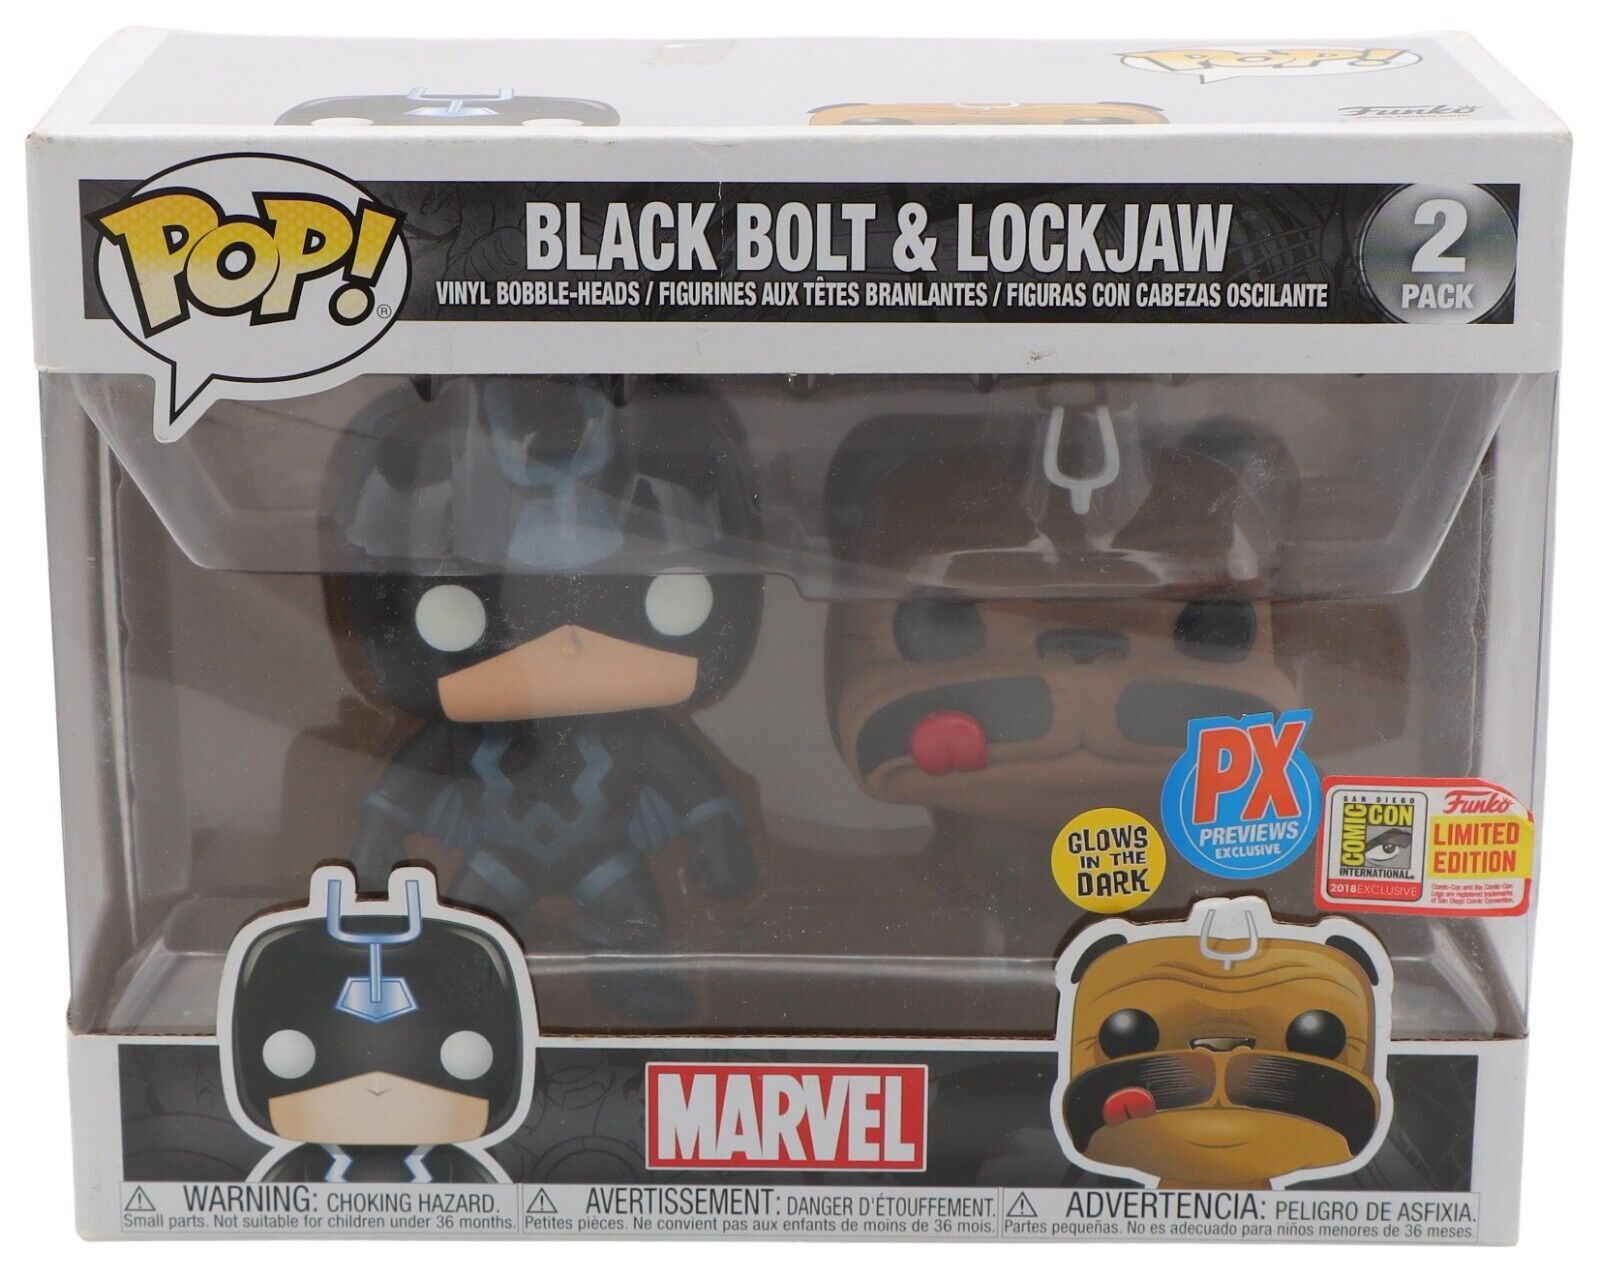 Pop Funko 2 Pack Black Bolt and Lockjaw Vinyls - Glows, PX Previews, Comic Con